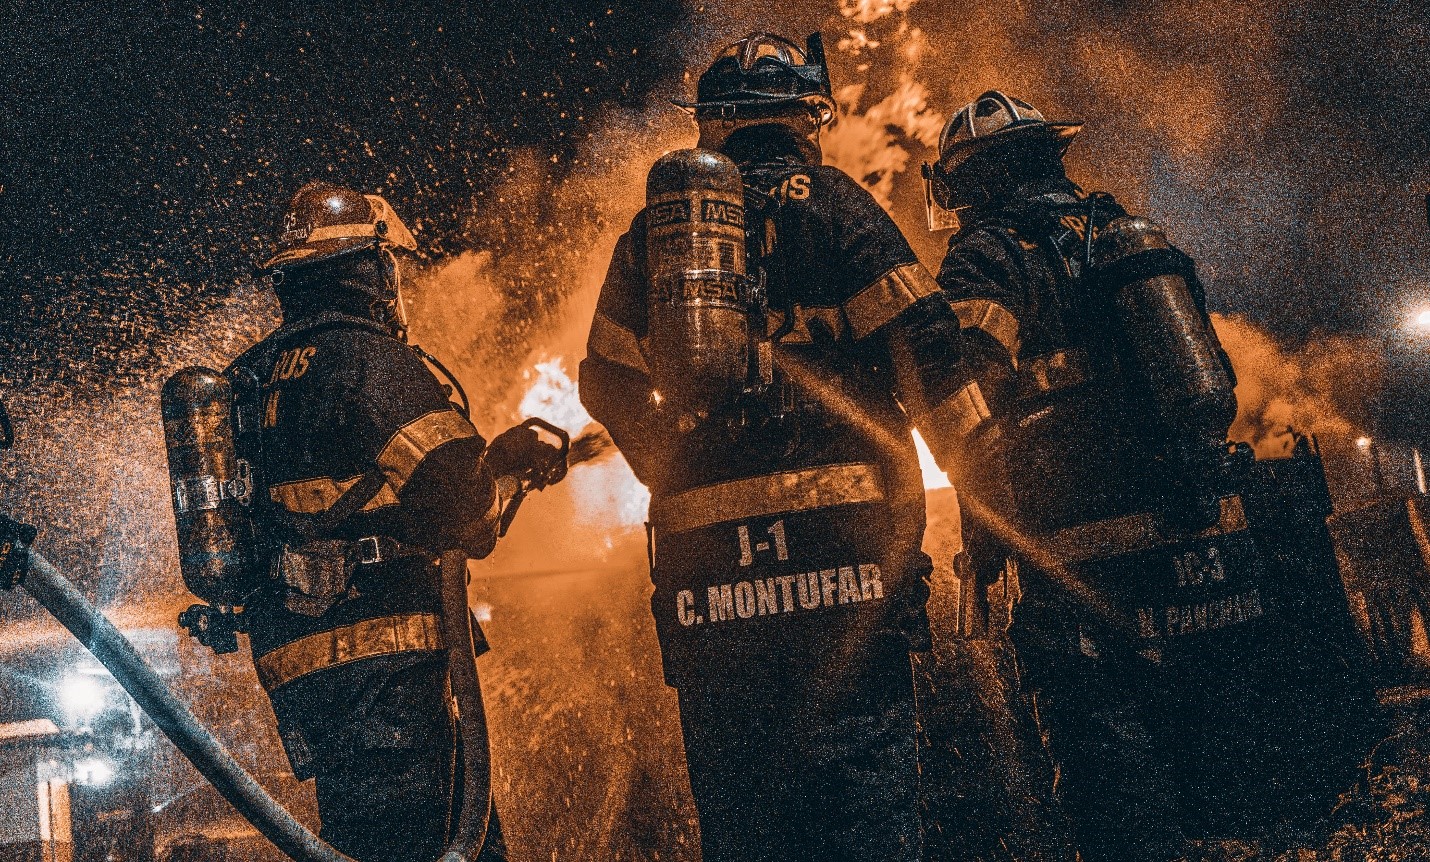 Firefighters responding to a fire disaster